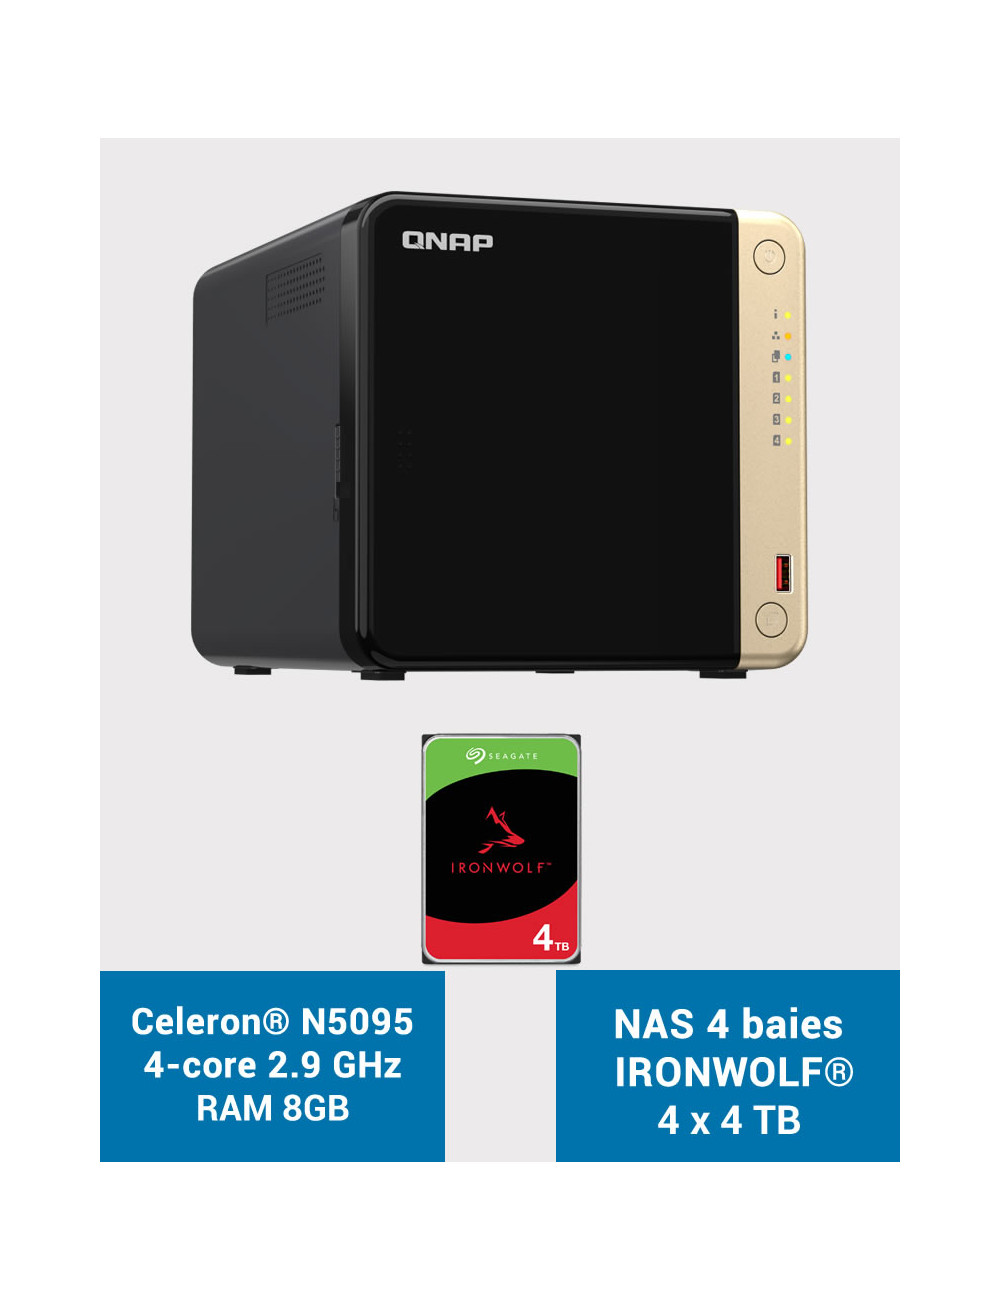 QNAP TS-464 8GB Serveur NAS 4 baies IRONWOLF 16To (4x4To)